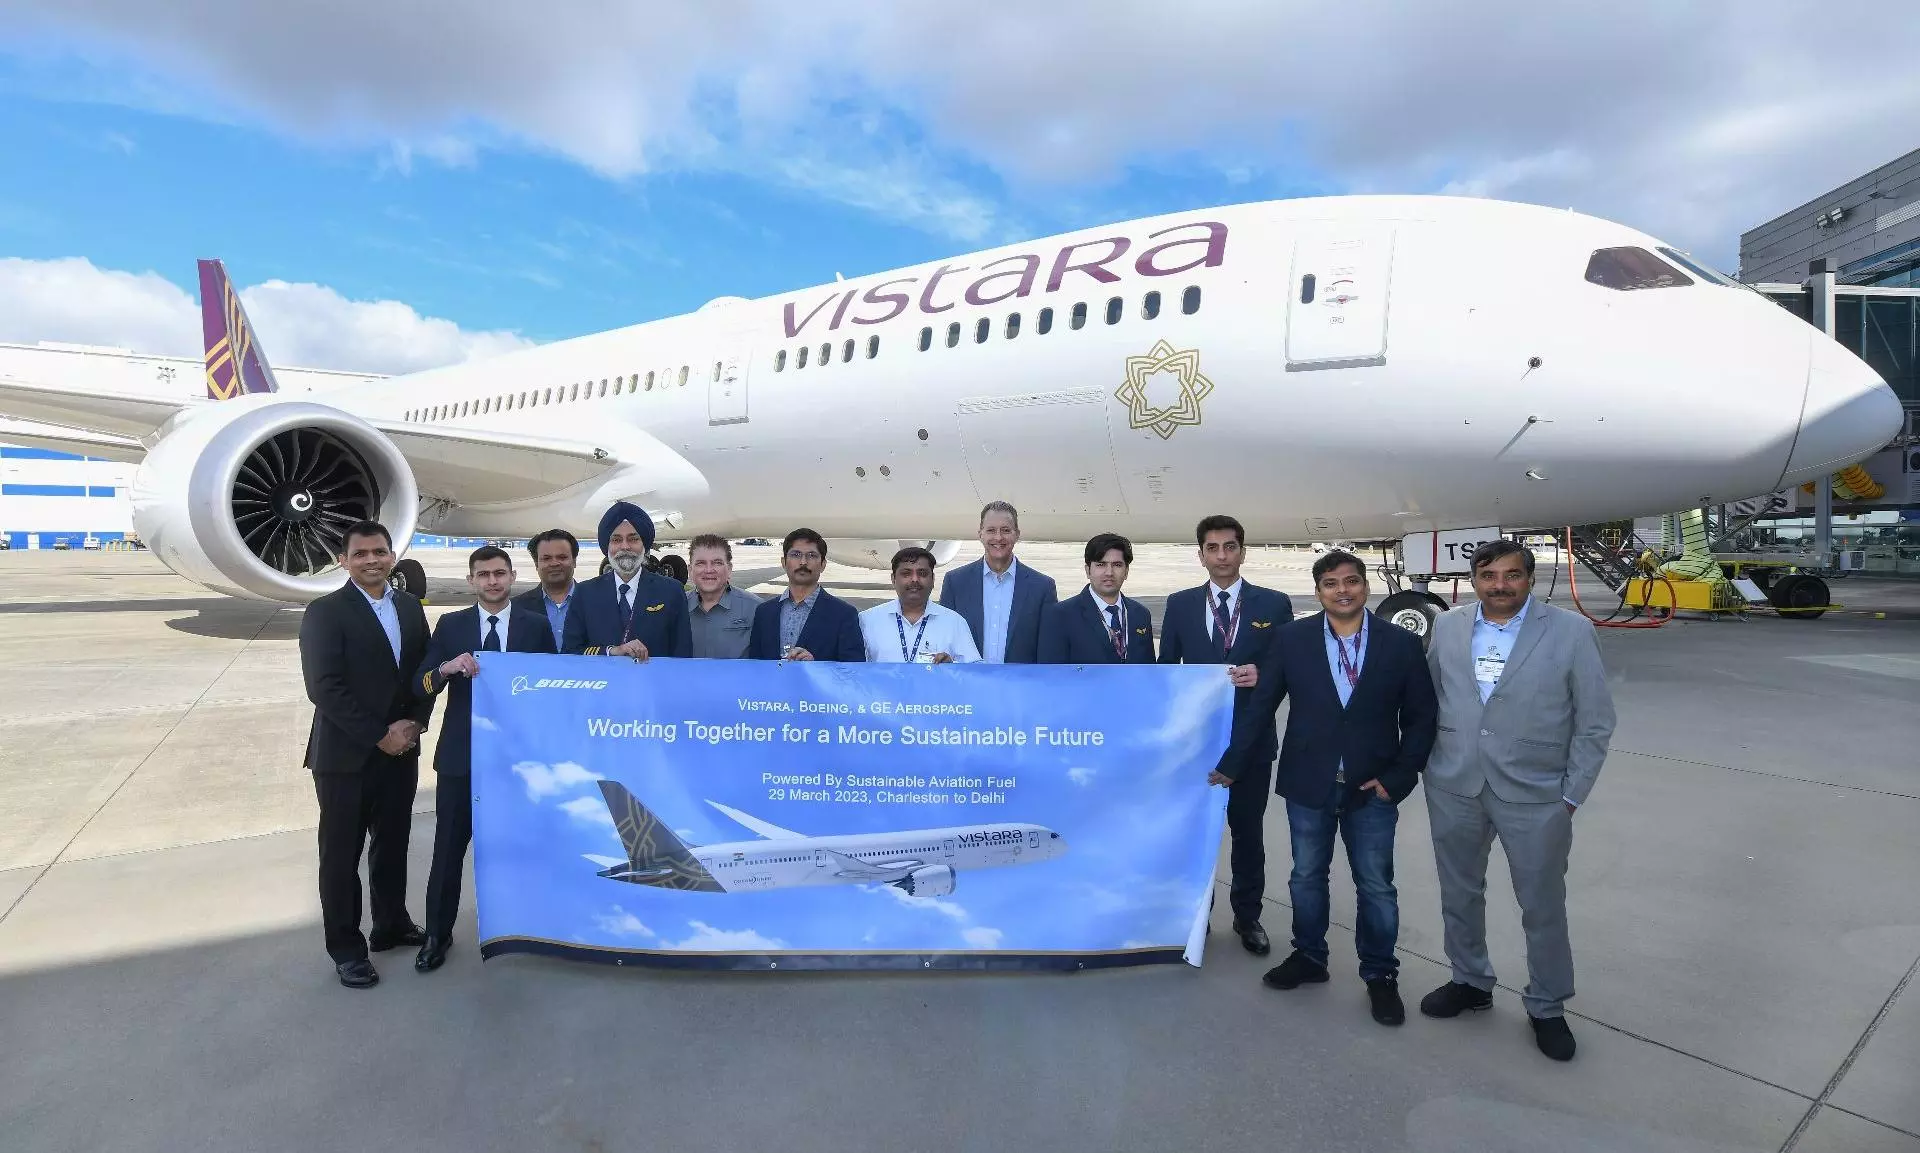 Vistara becomes first Indian airline to operate long-haul wide-body aircraft on SAF